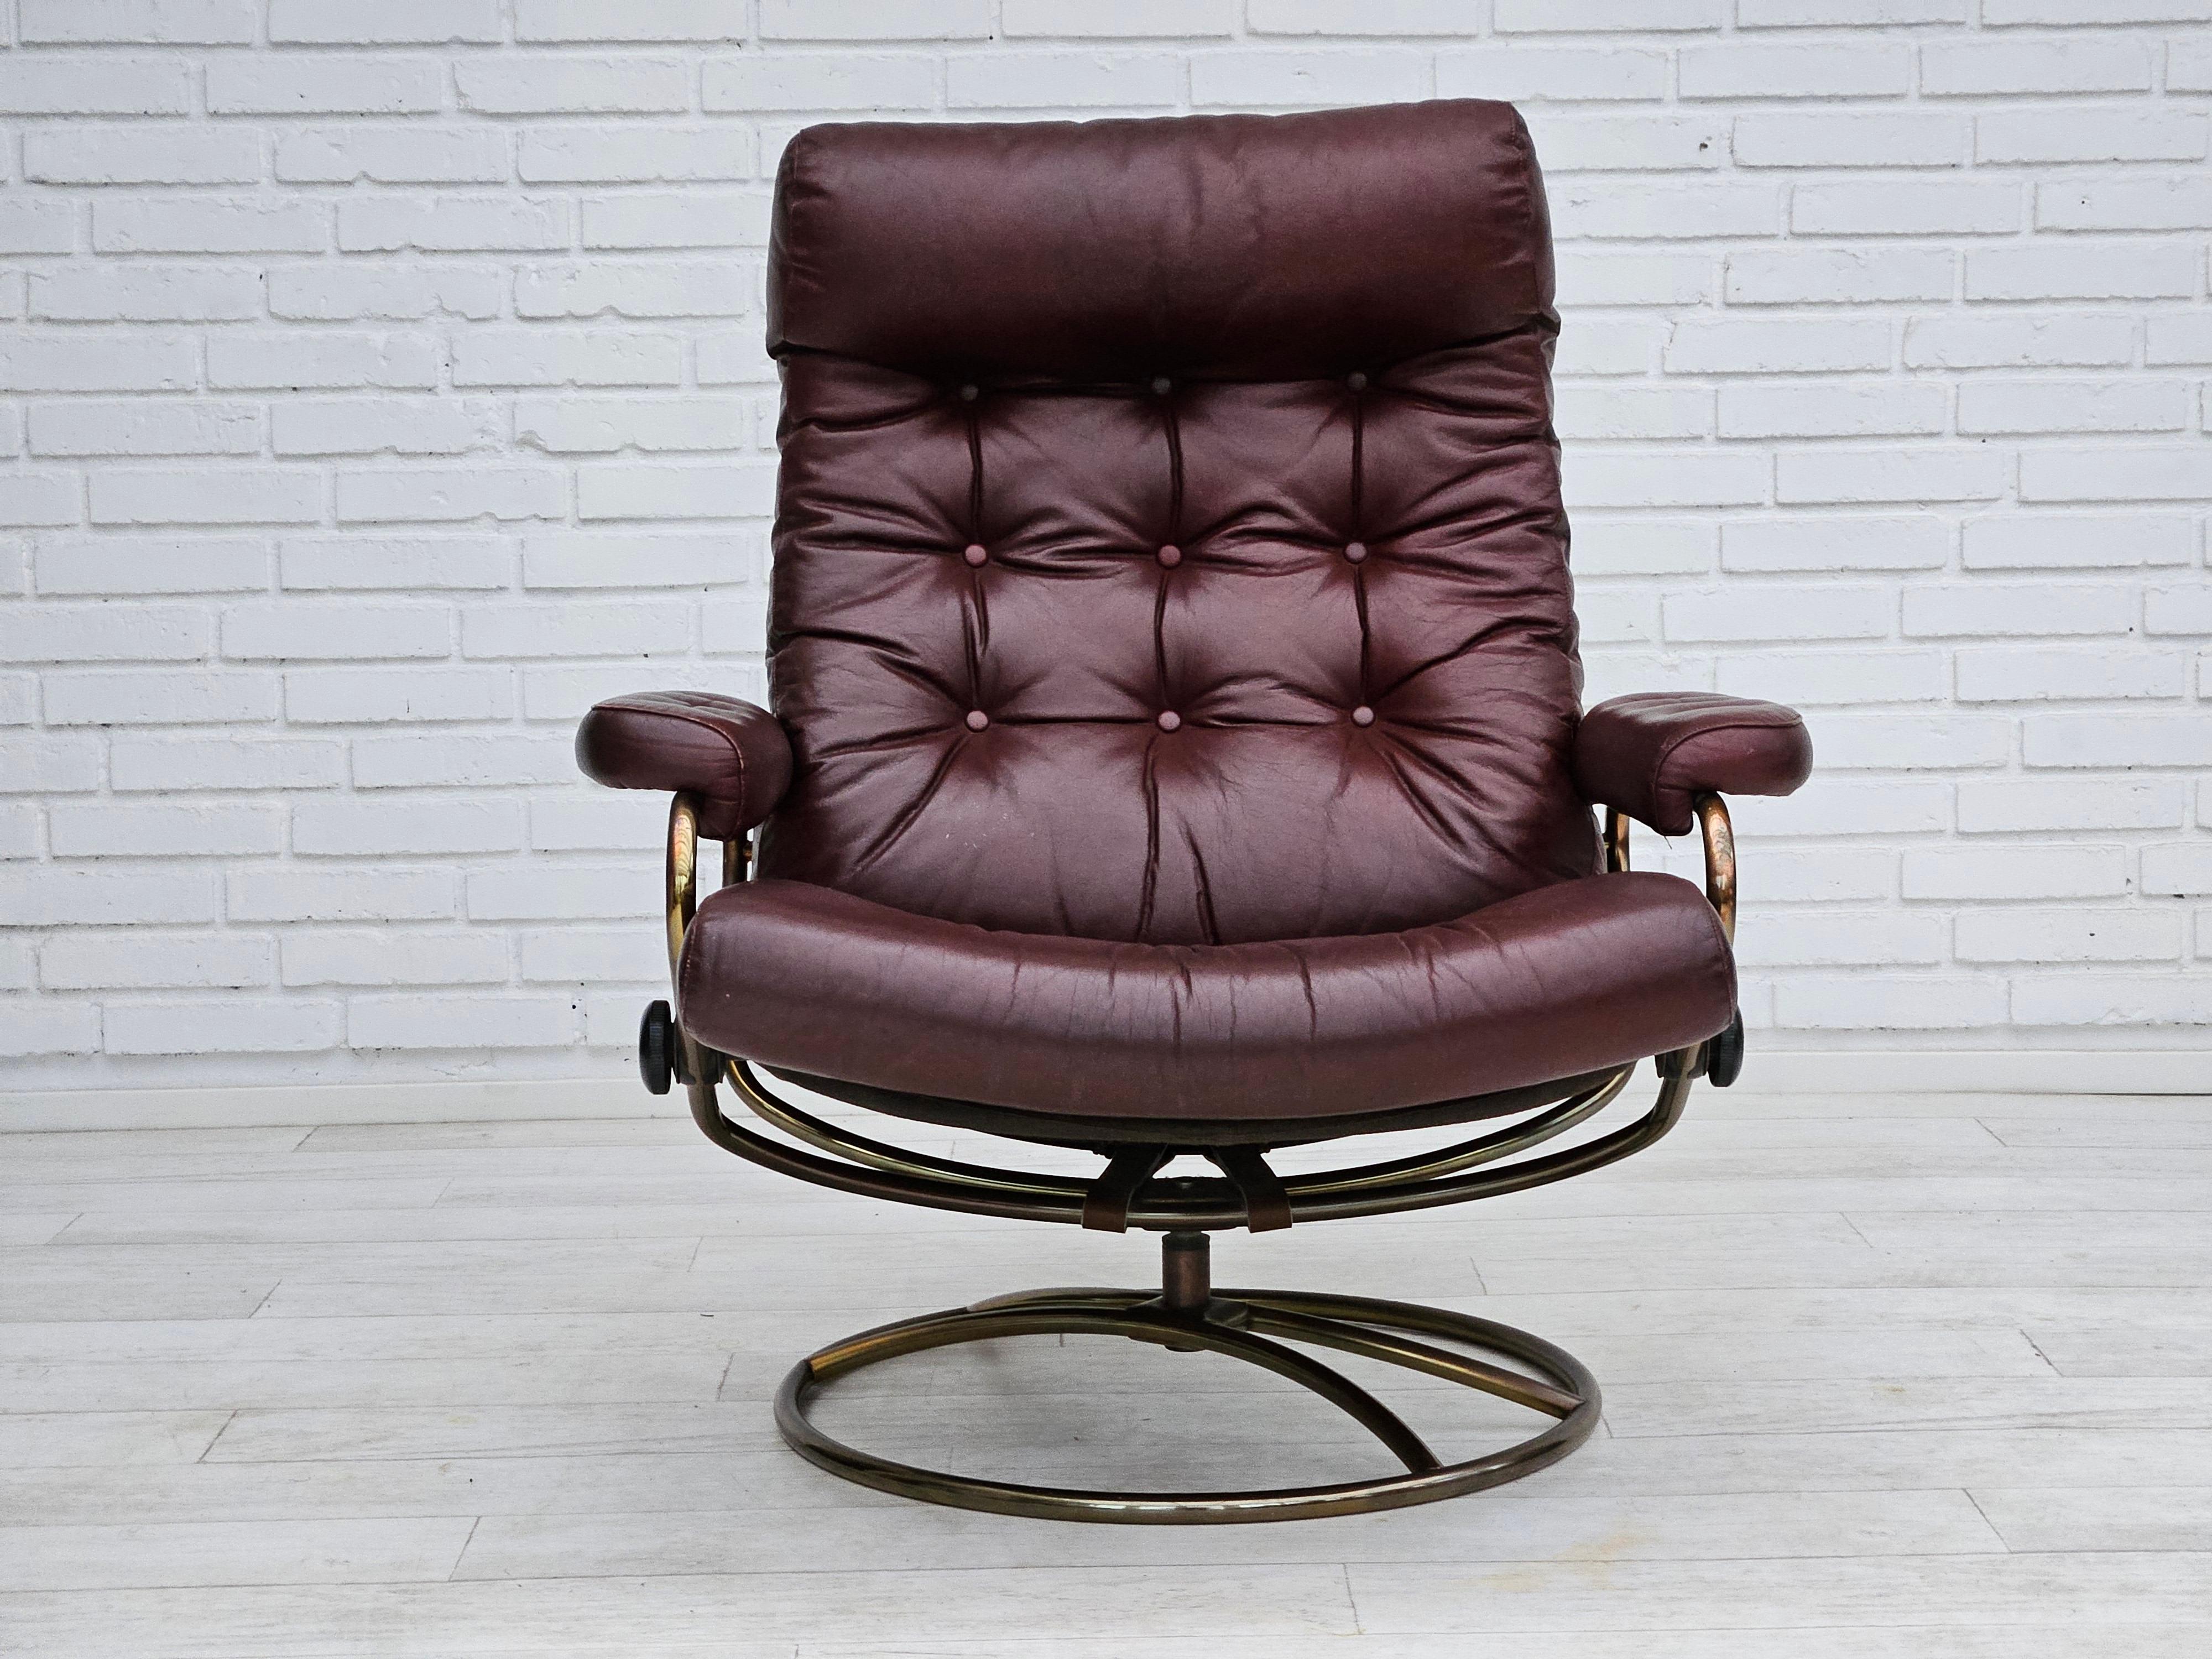 1970s, Norwegian relax swivel chair by Stressless, original very good condition. 3